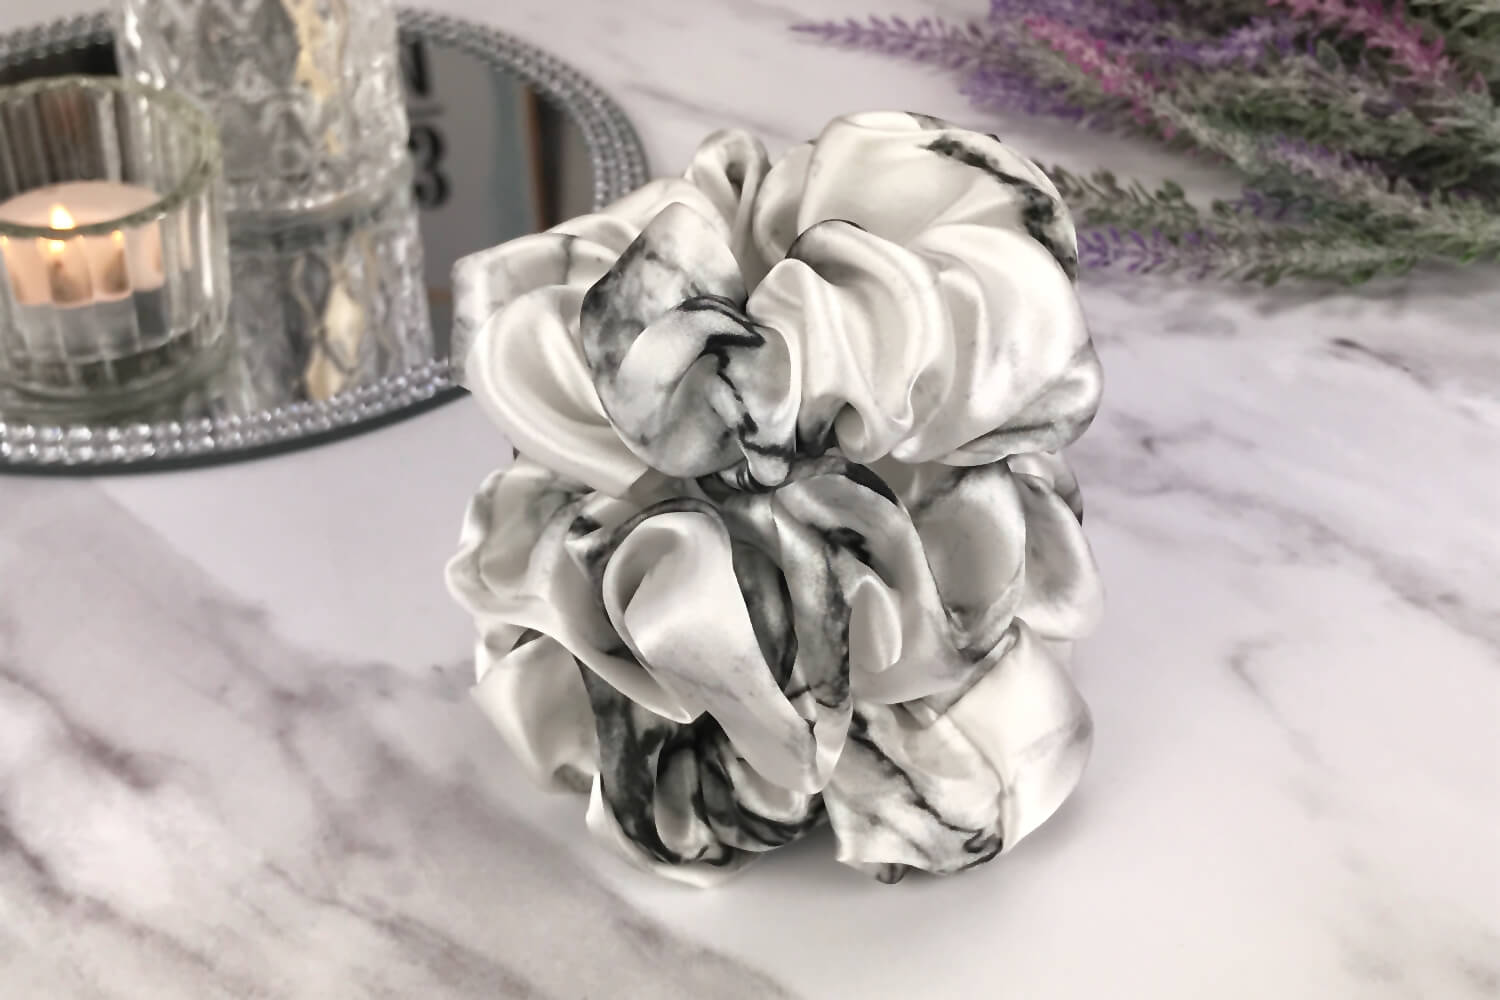 Celestial Silk large white marble silk scrunchies stacked on marble counter with lavender plant and a candle in the background